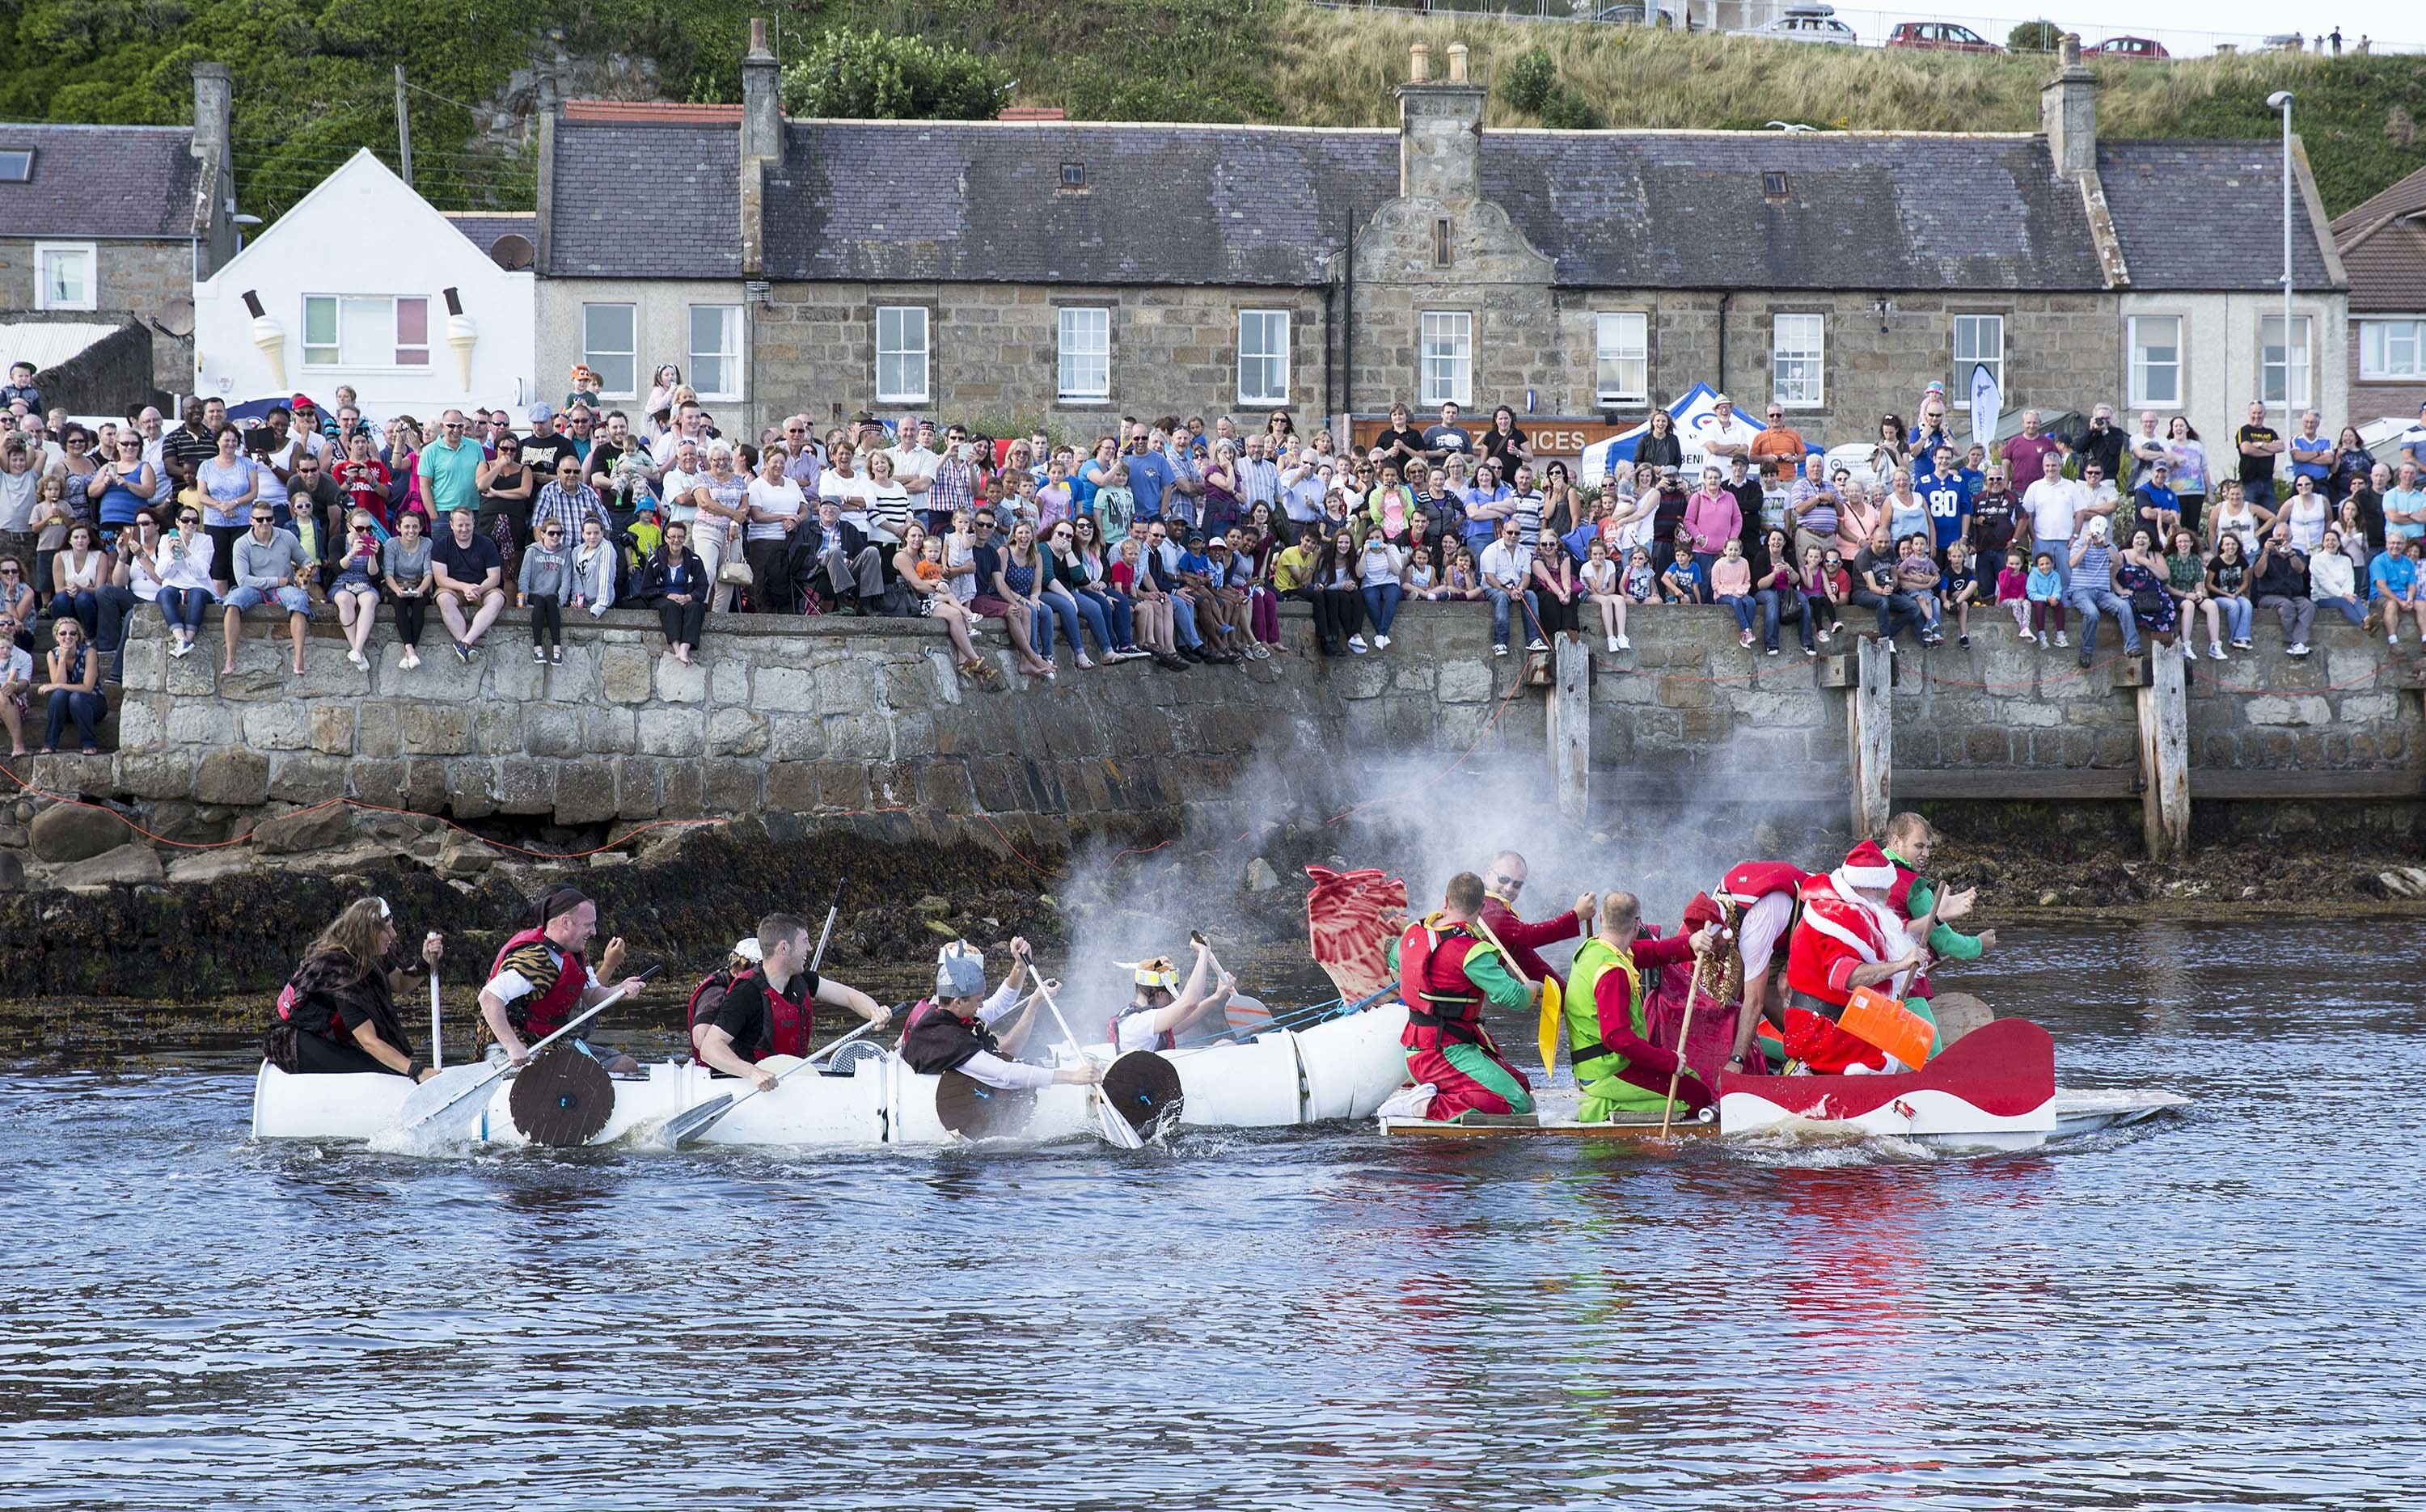 RAF Lossiemouth's raft race will make its return this year, after last year's event was called off.